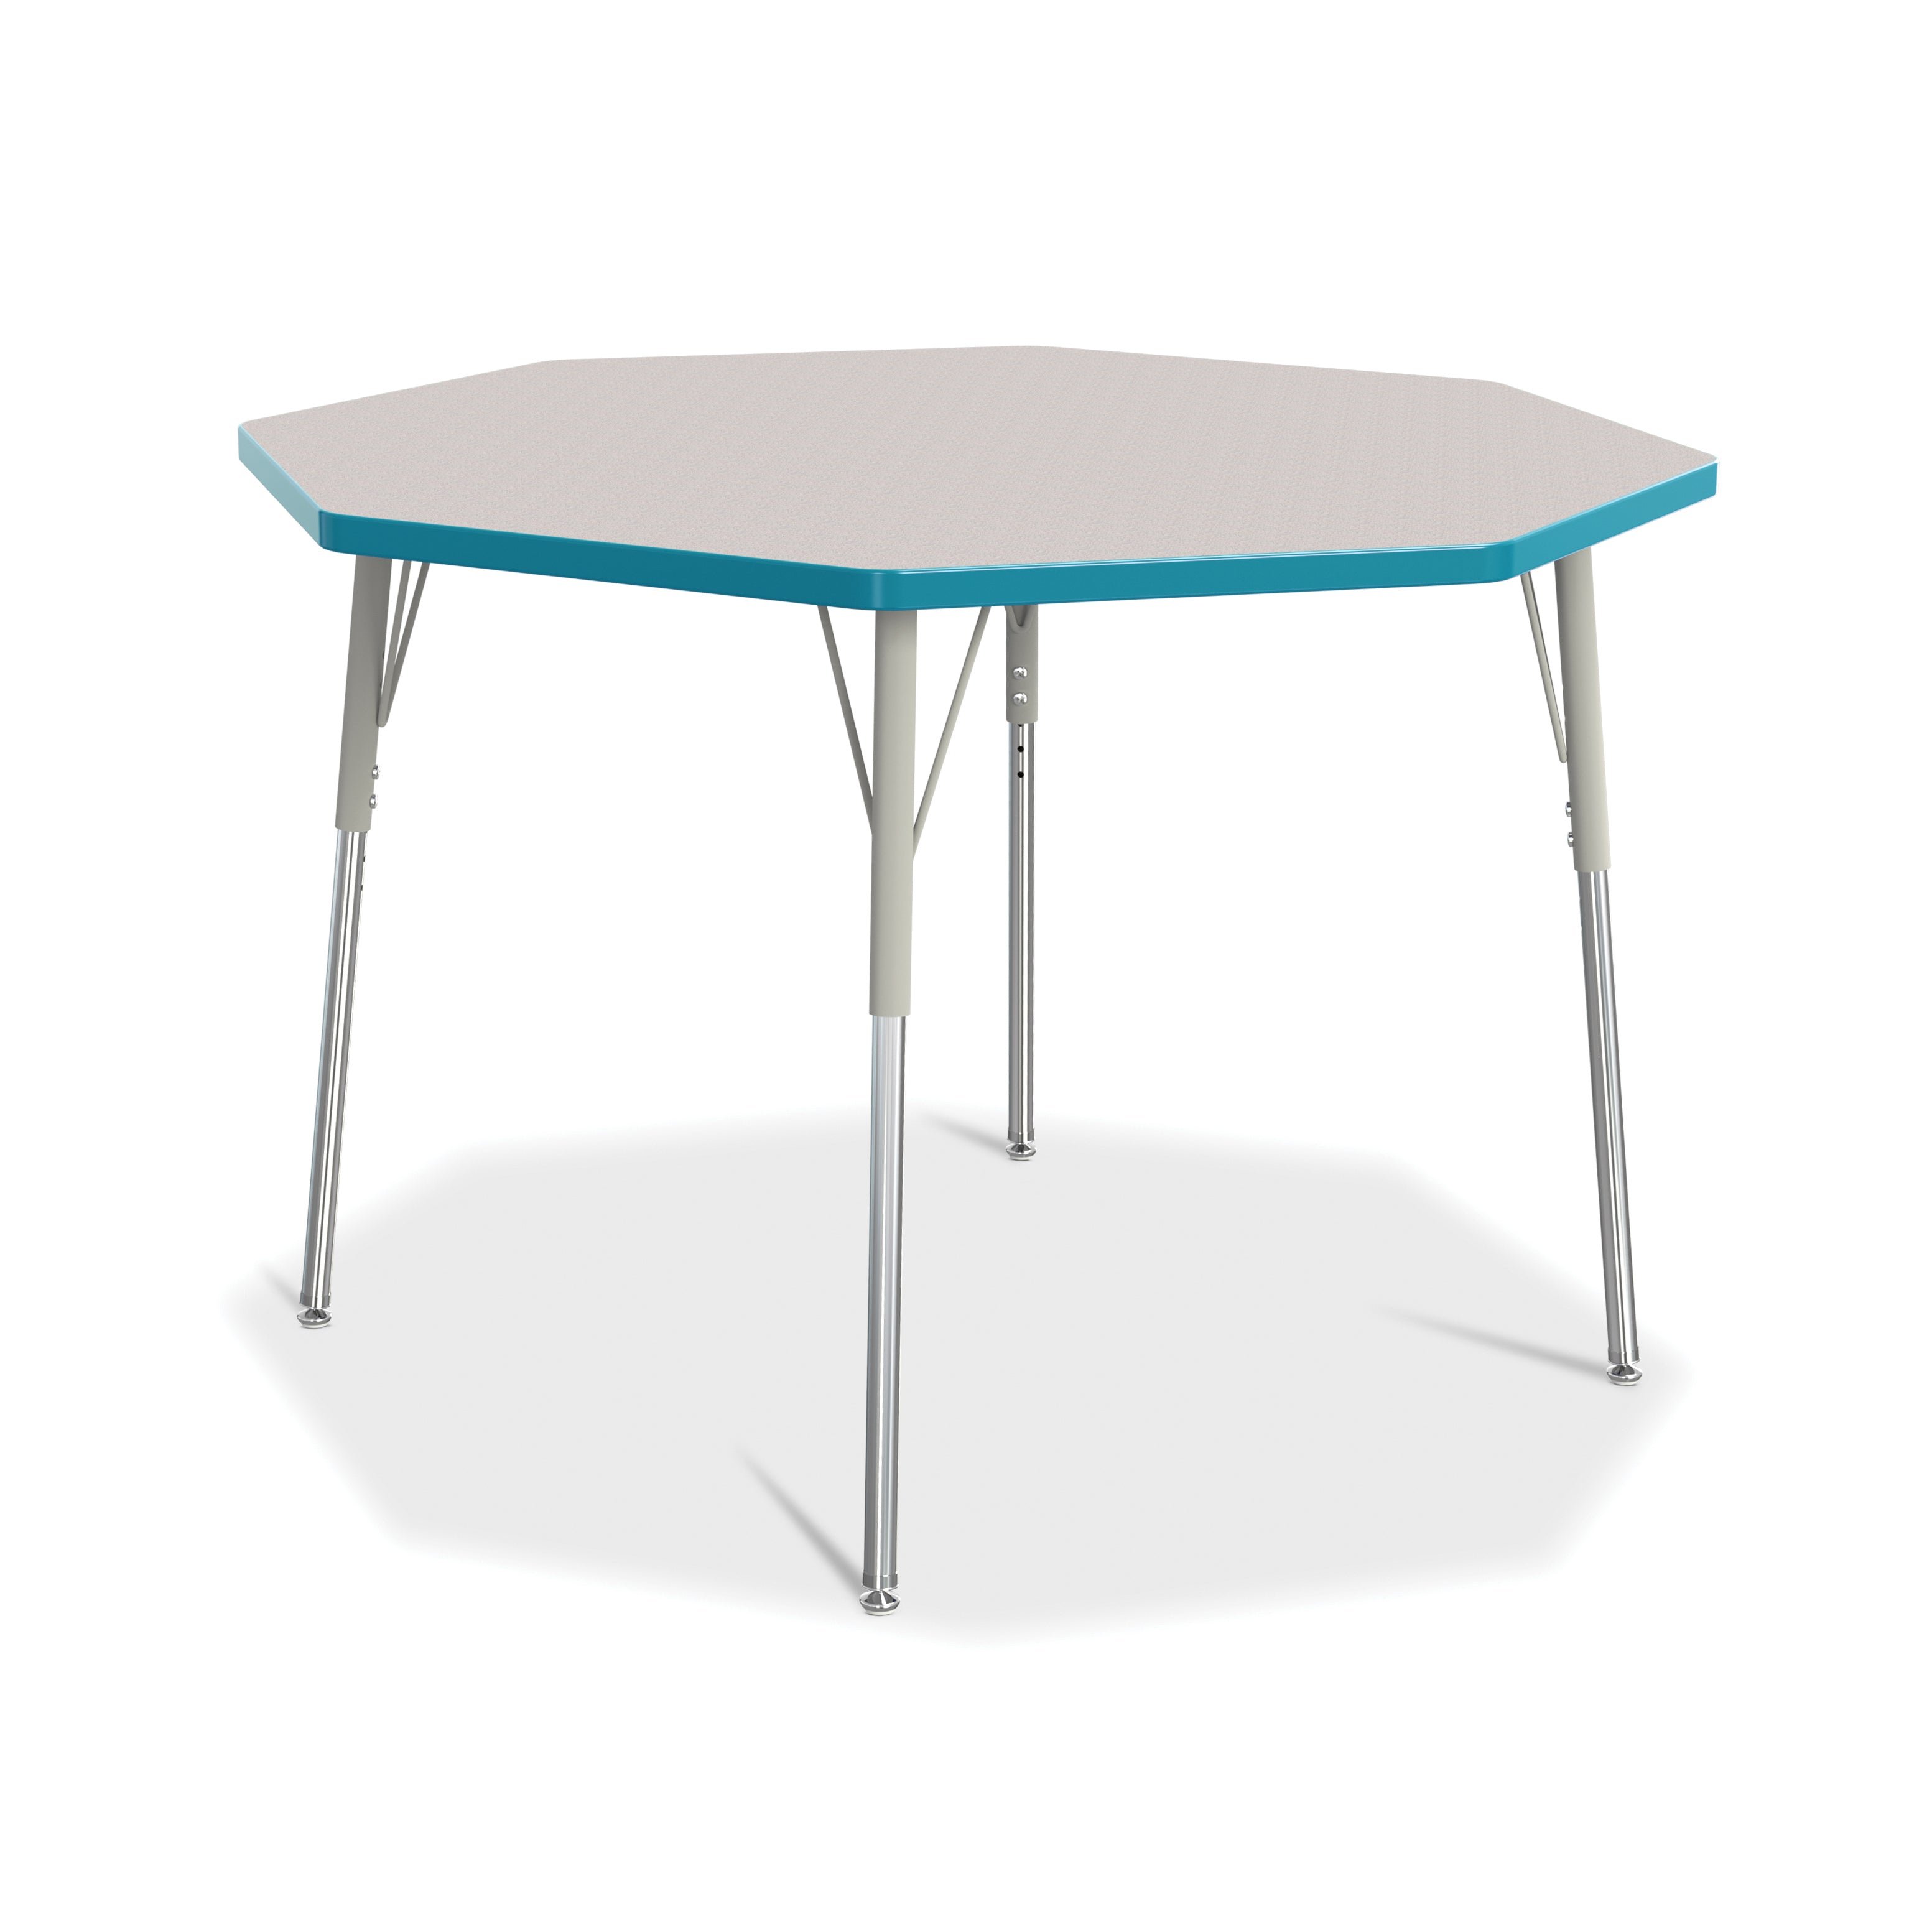 6428JCA005, Berries Octagon Activity Table - 48" X 48", A-height - Freckled Gray/Teal/Gray